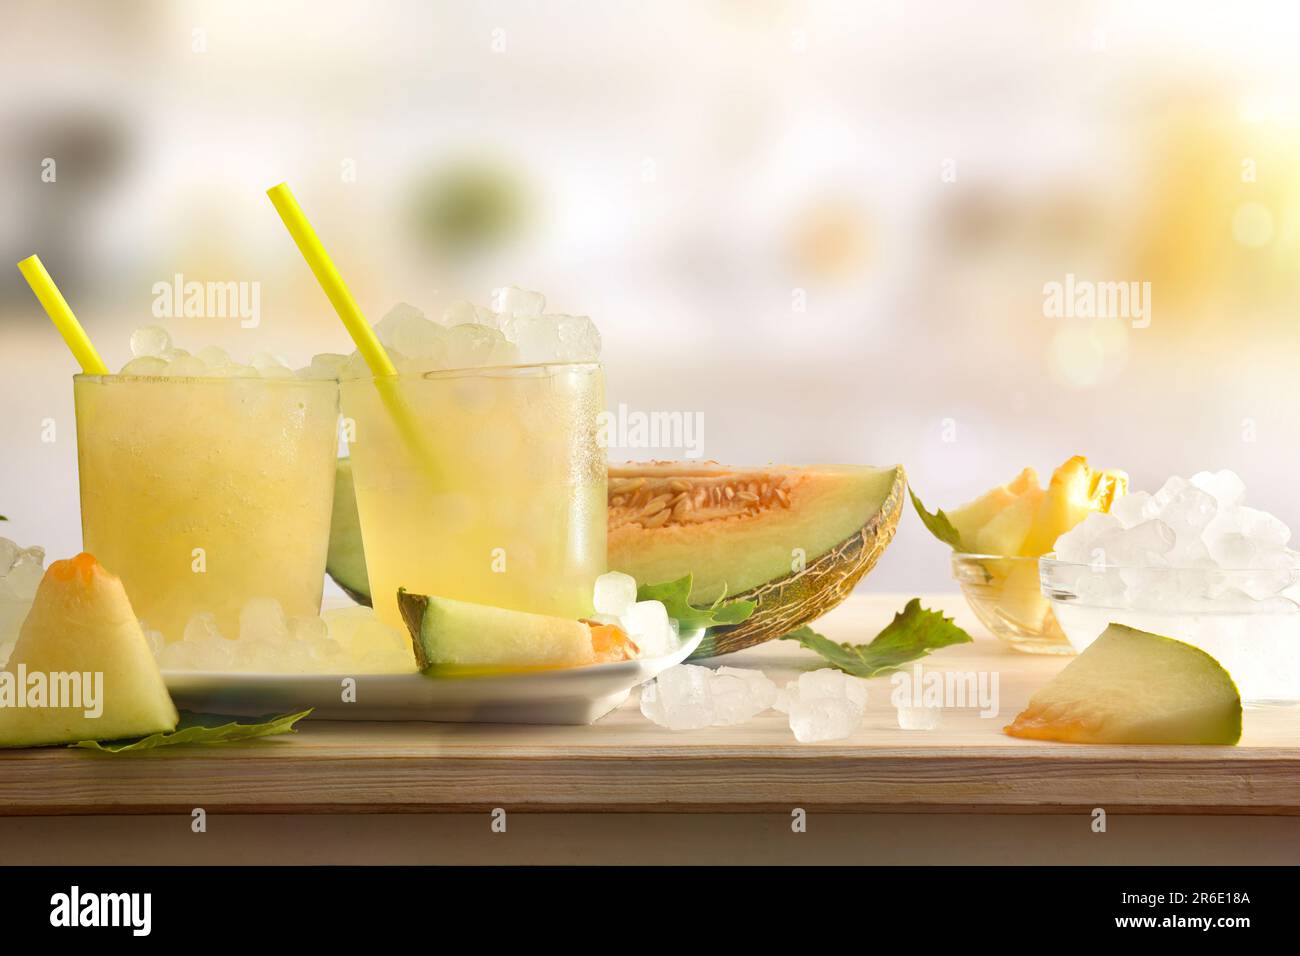 https://c8.alamy.com/comp/2R6E18A/two-glasses-with-iced-melon-drink-on-wooden-table-full-of-crushed-ice-and-sliced-fruit-around-with-kitchen-in-the-background-front-view-horizontal-c-2R6E18A.jpg